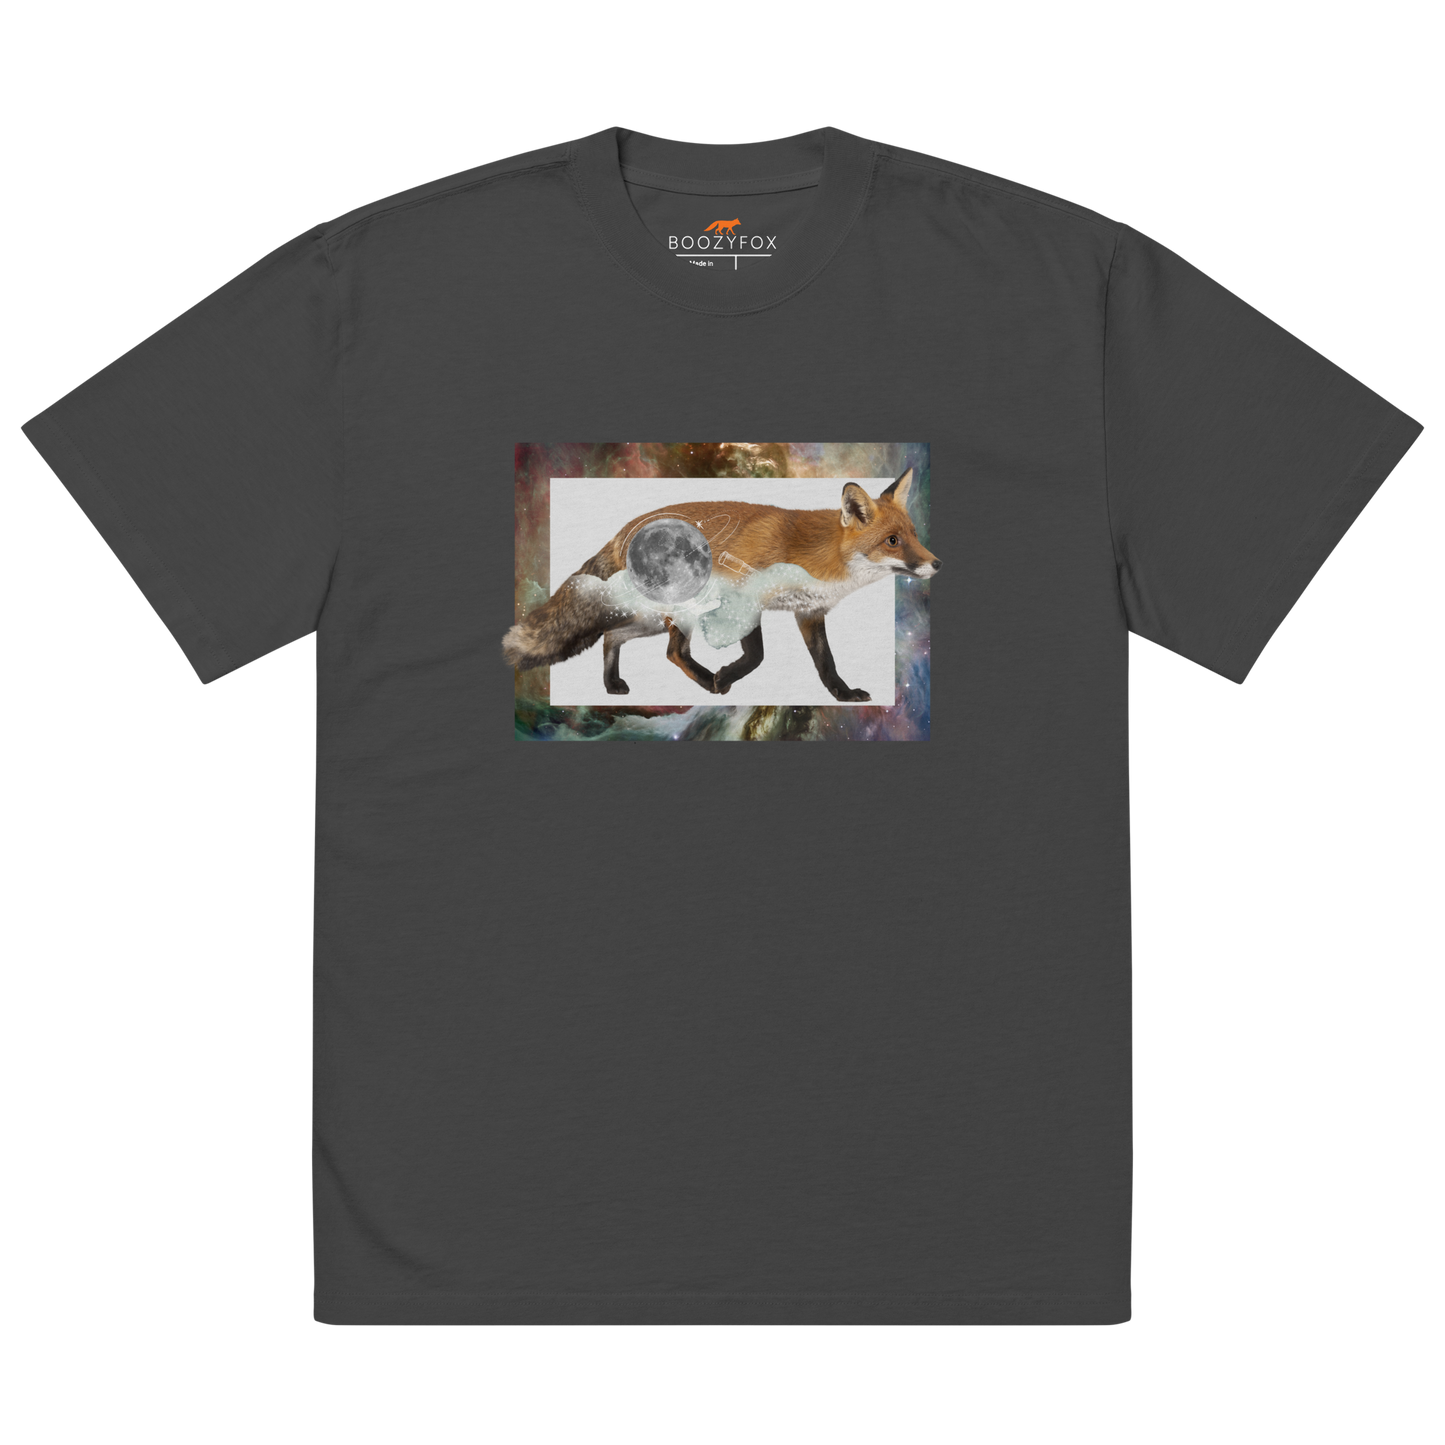 Faded Black Fox Oversized T-Shirt featuring a stellar Space Fox graphic on the chest - Cool Graphic Fox Oversized Tees - Boozy Fox